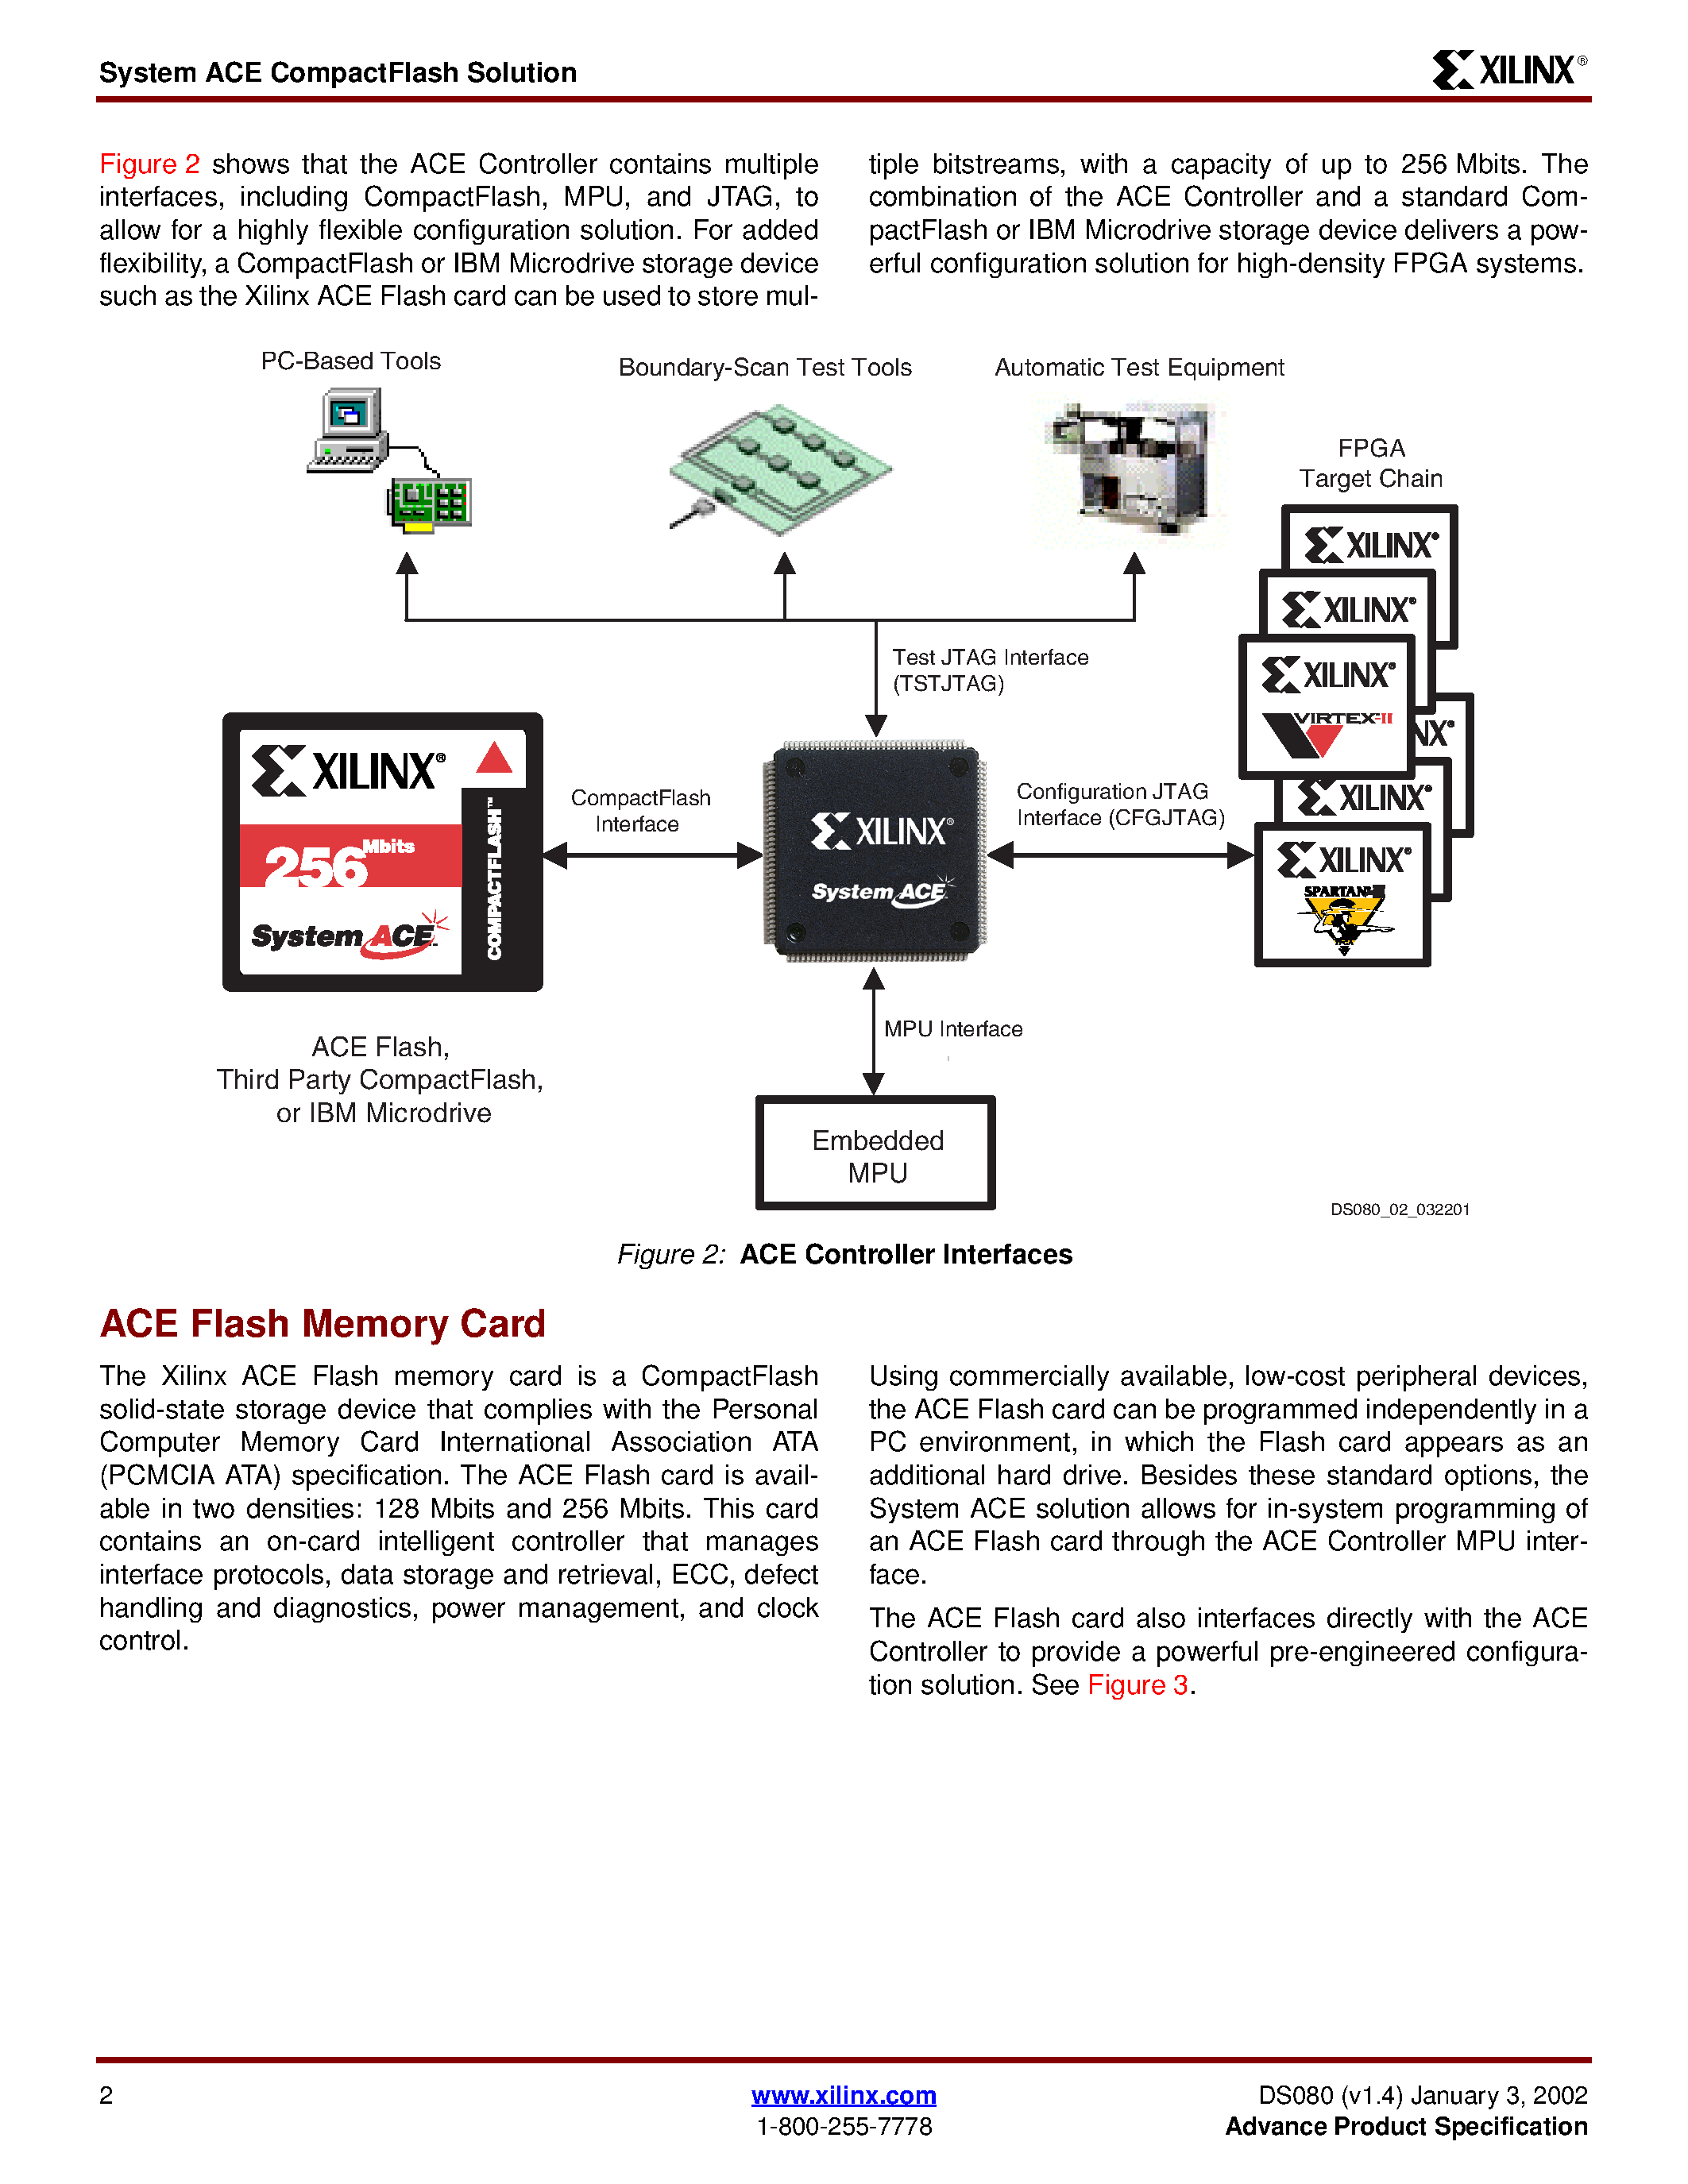 Даташит XCCACE-TQ144 - System ACE CompactFlash Solution страница 2